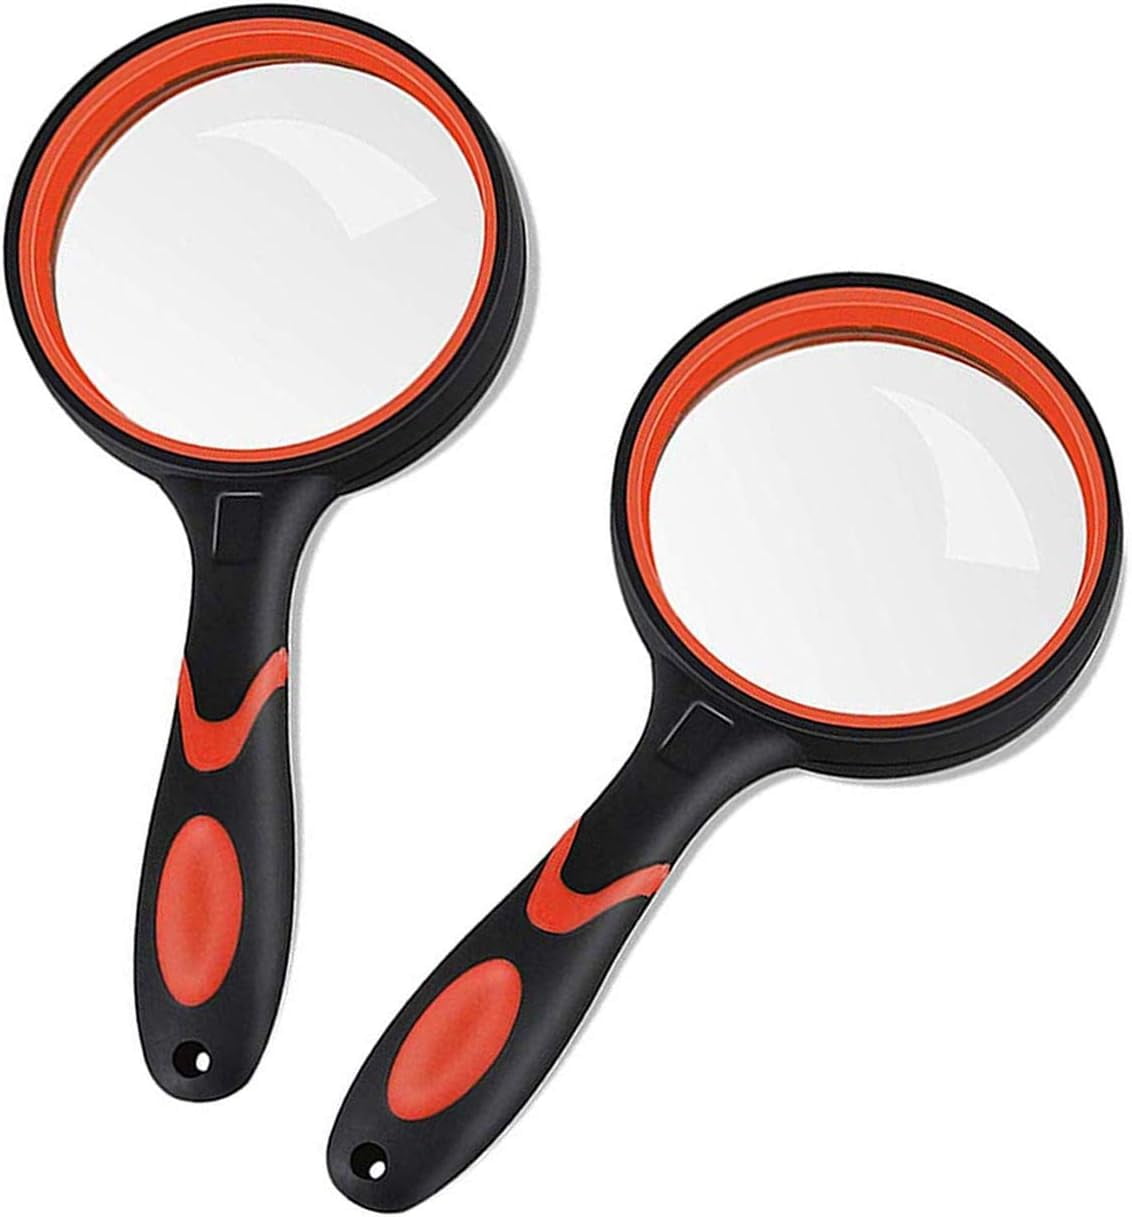 10x Magnifying Glass Handheld Reading Magnifier Real Lens with Non Slip  Orange 2 Pcs 